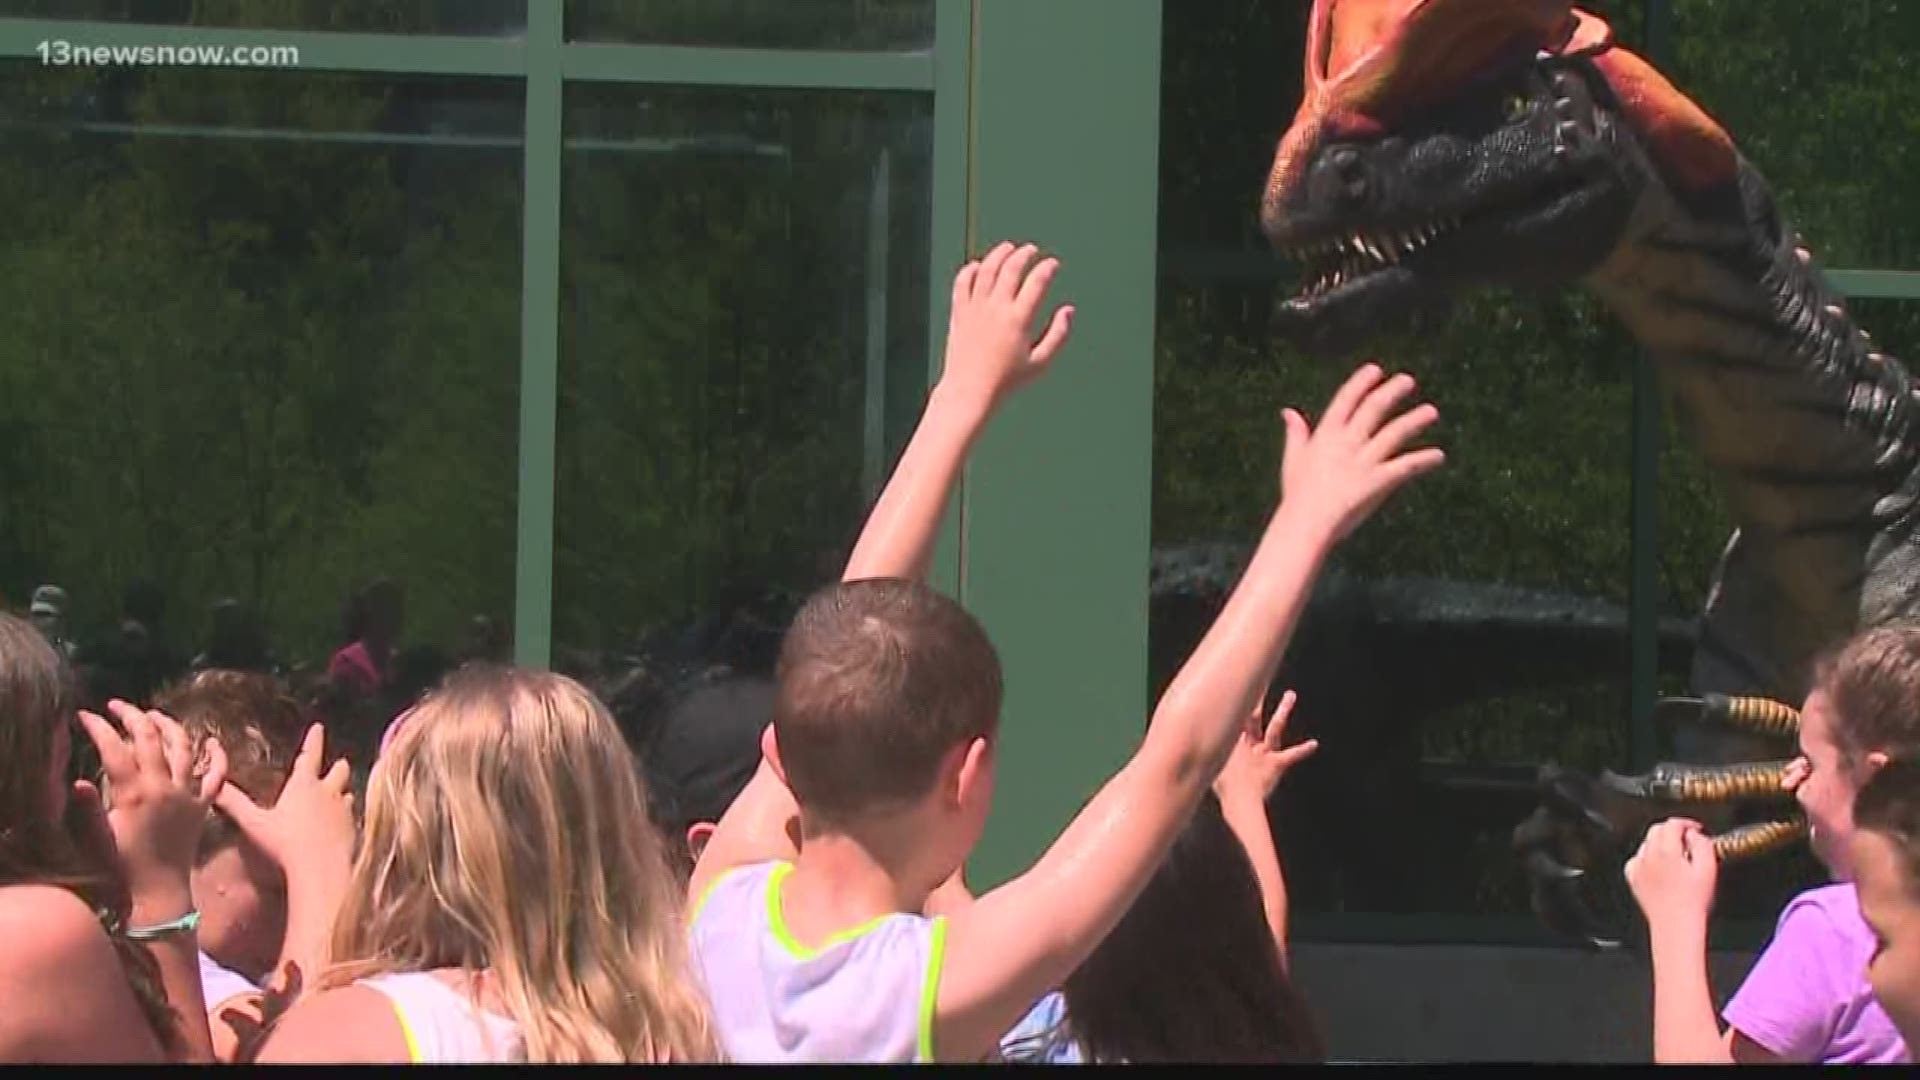 This weekend in Newport News dinosaurs are back at the Virginia Living Museum.